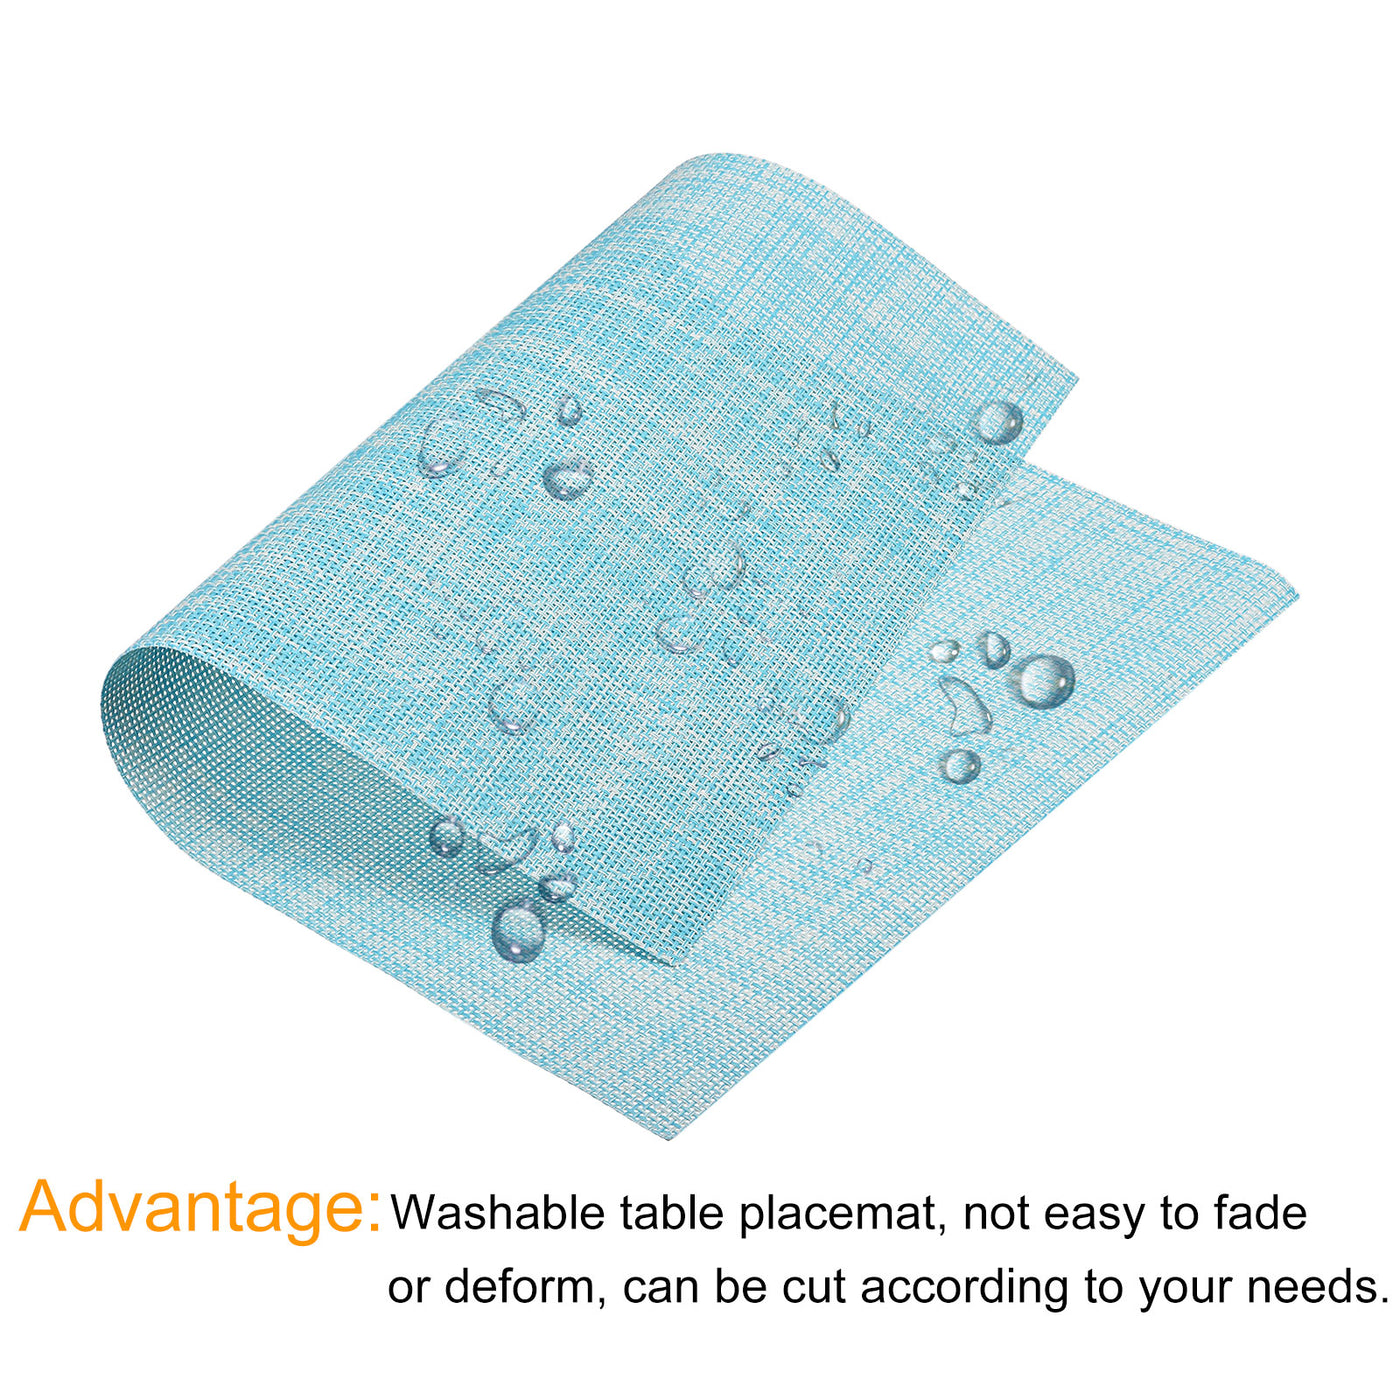 uxcell Uxcell Place Mats, 450x300mm Table Mats Set of 6 PVC Washable Woven Placemat Blue